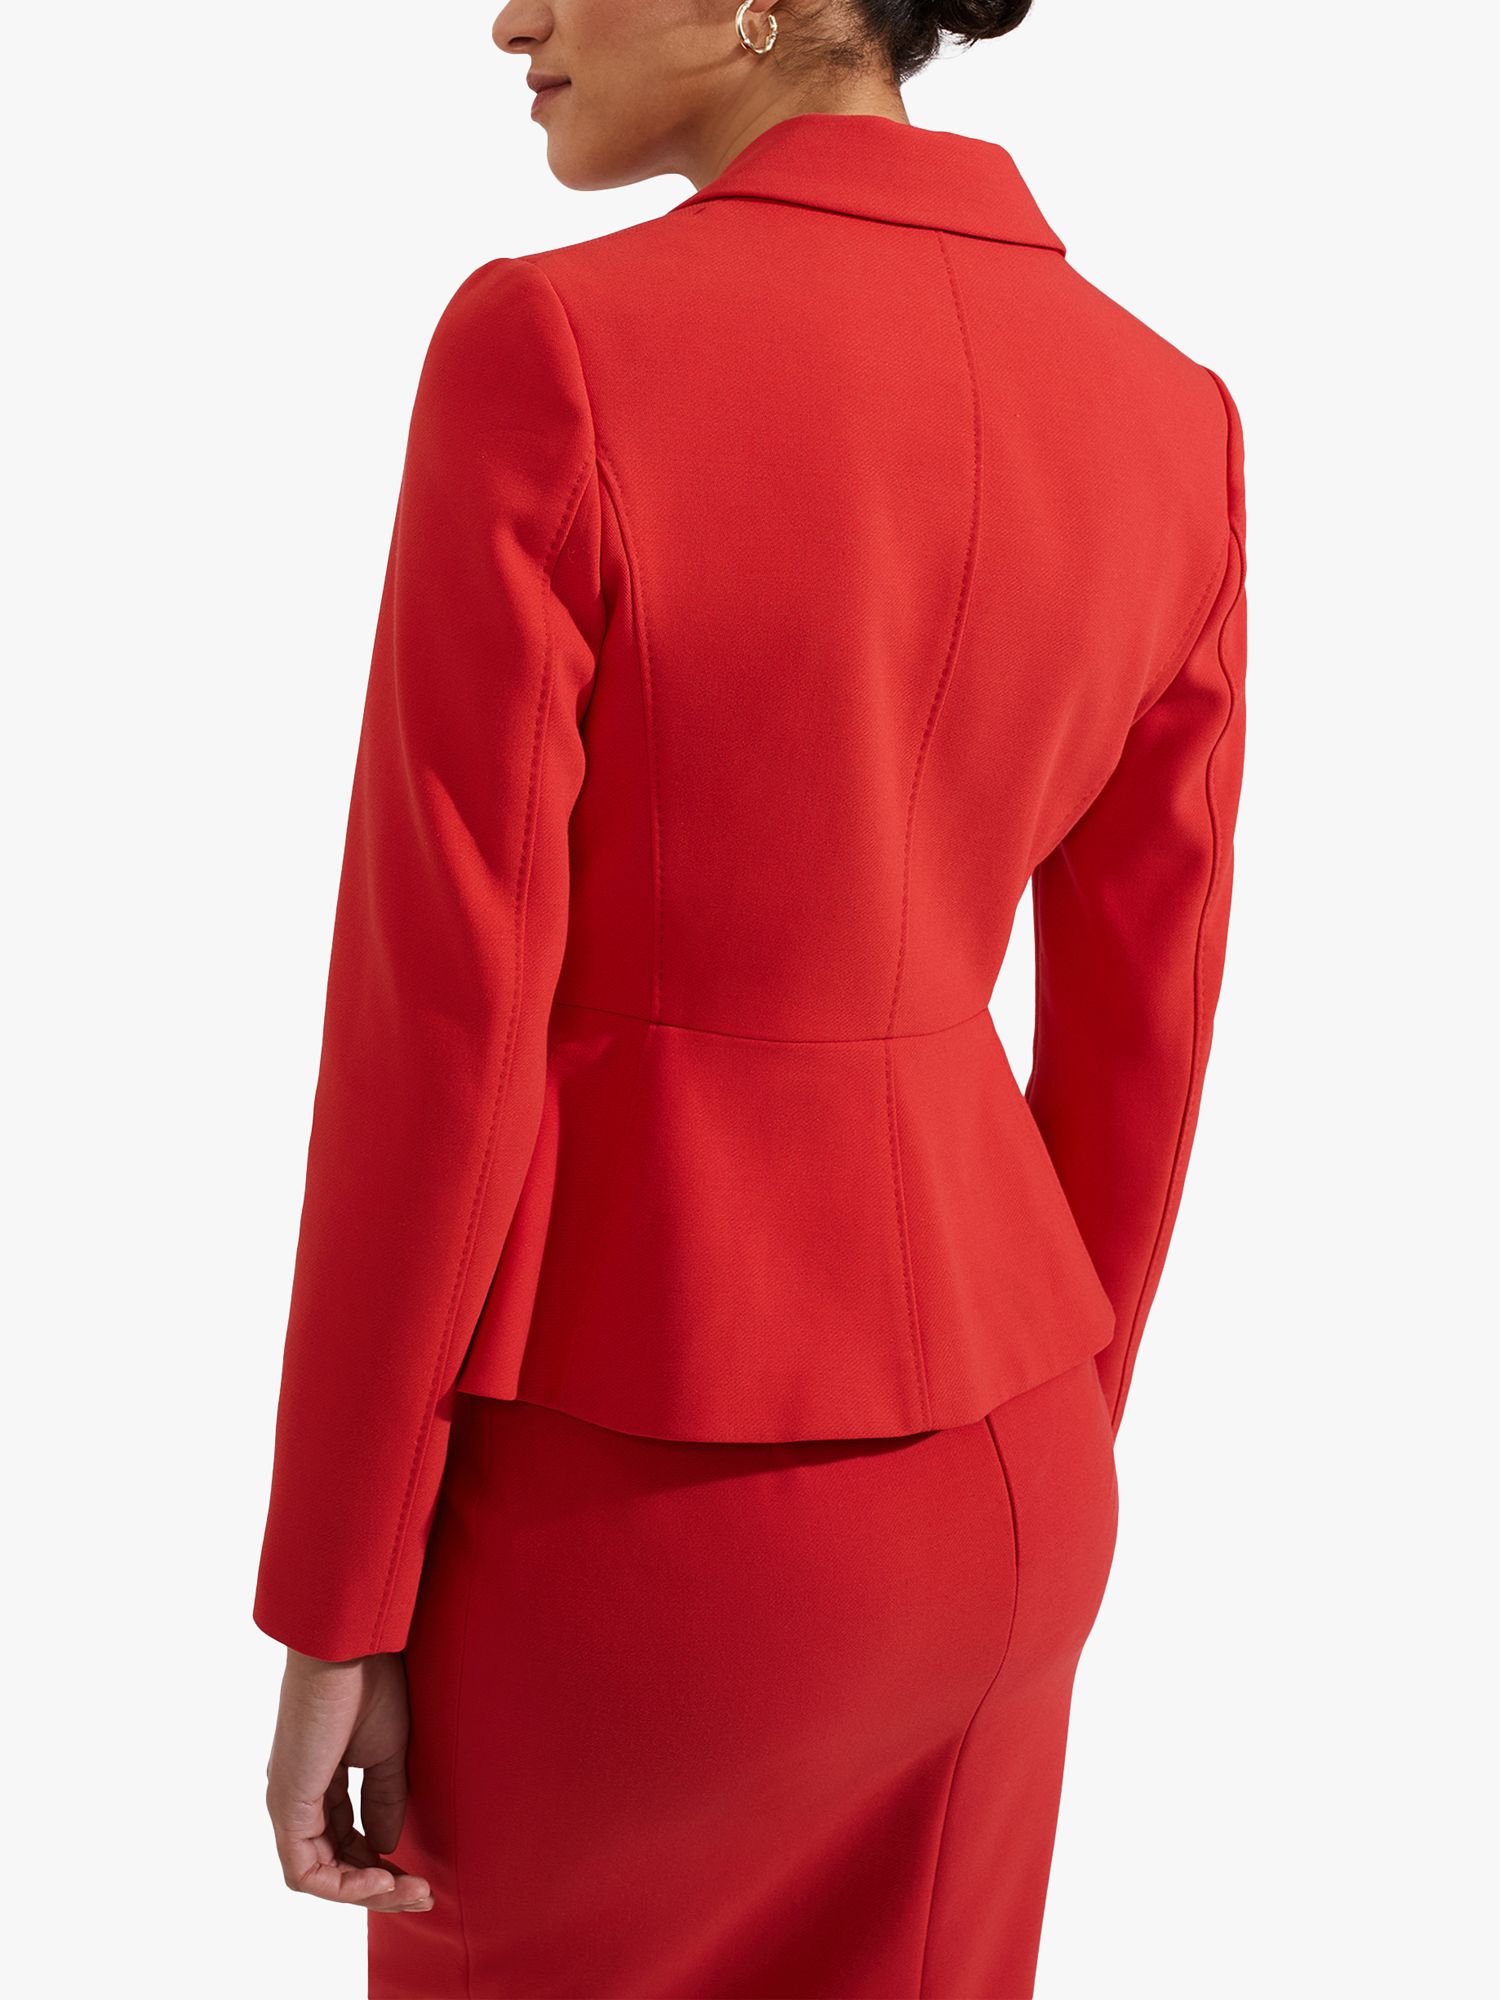 Hobbs Brielle Tailored Jacket, Cherry Red, 10